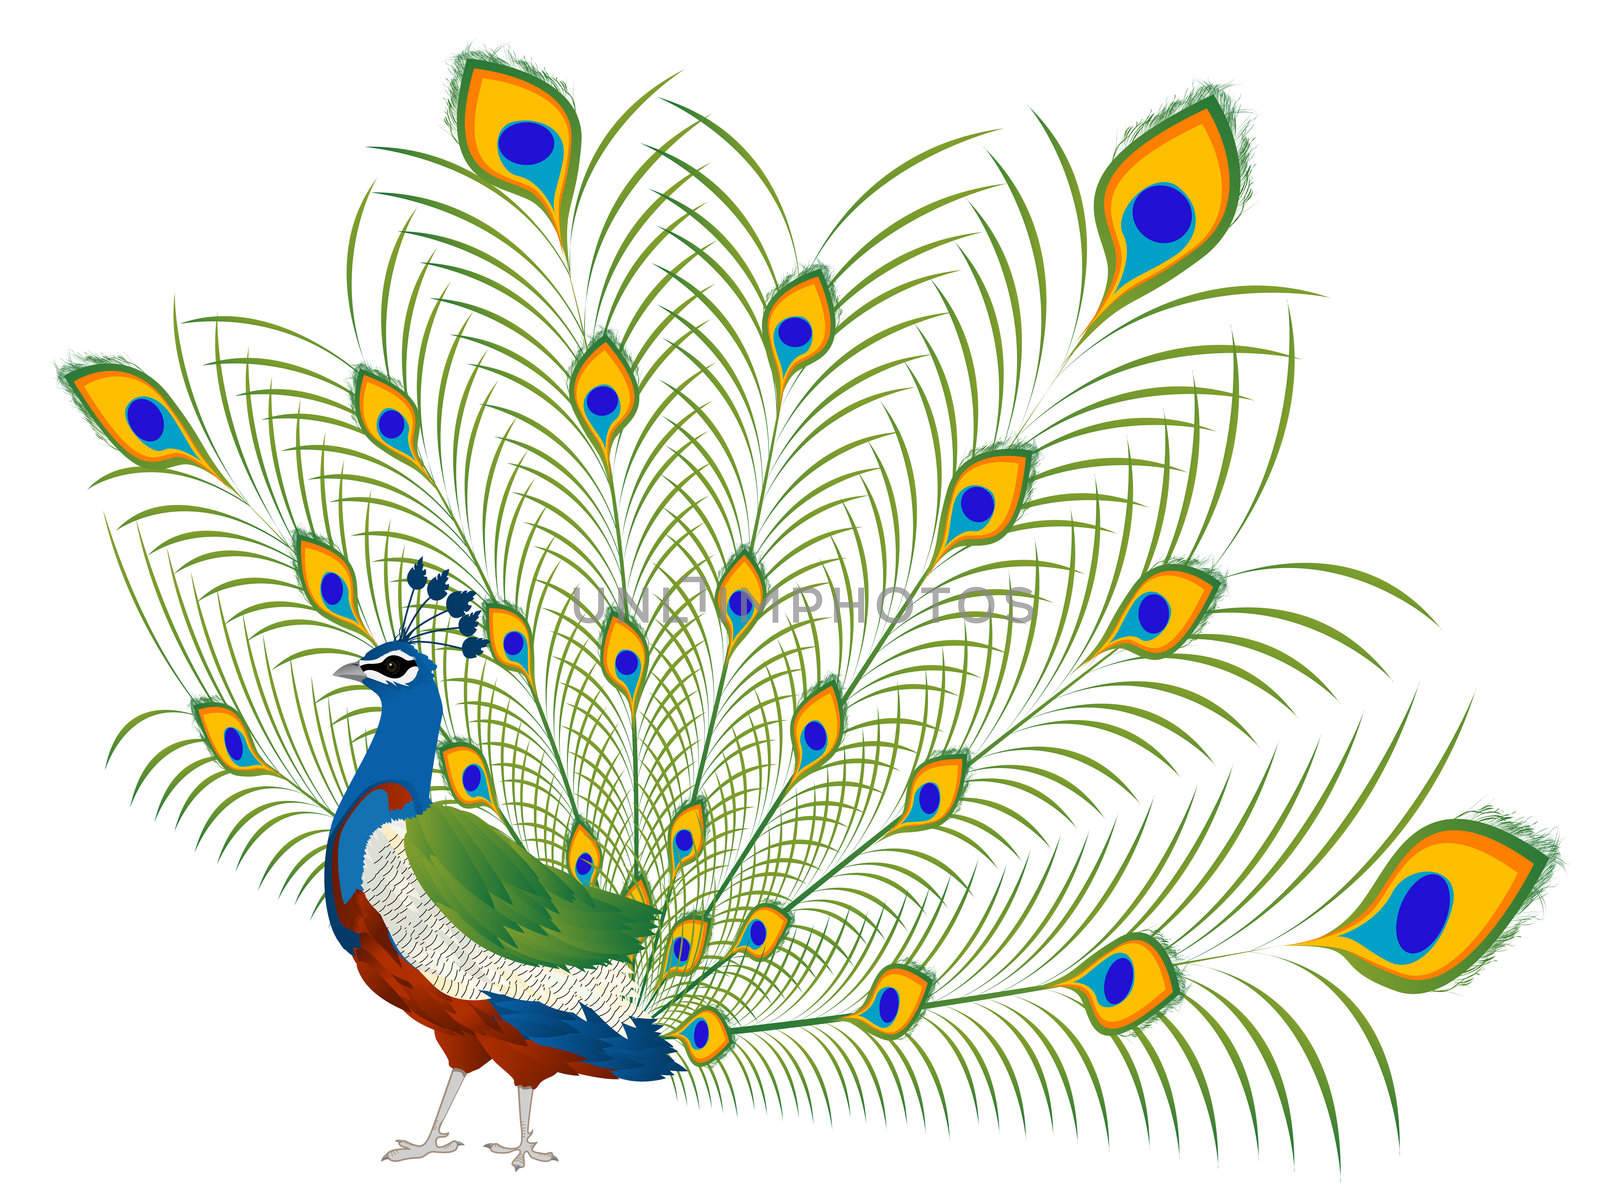 Illustration of a beautiful peacock over white